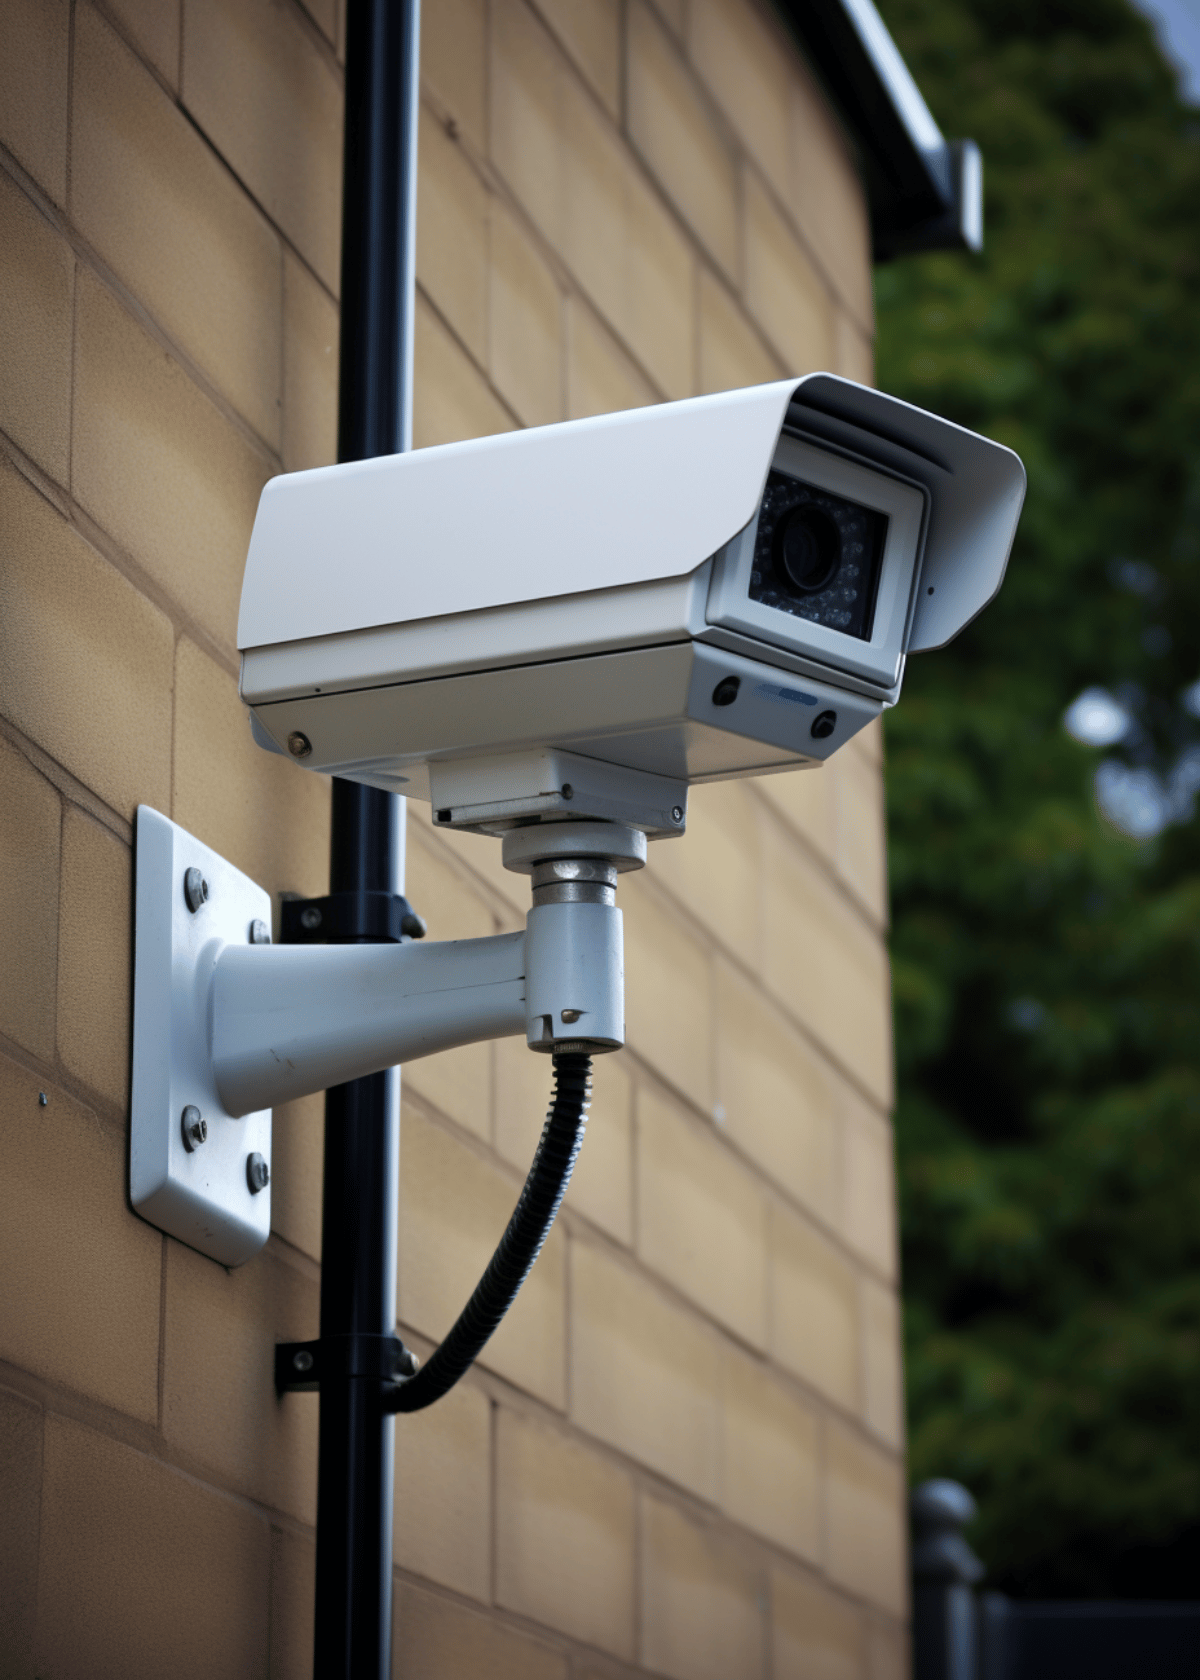 Maintain a Peace of Mind Knowing That You Have The Surveillance of The Best Wired Security Camera System!